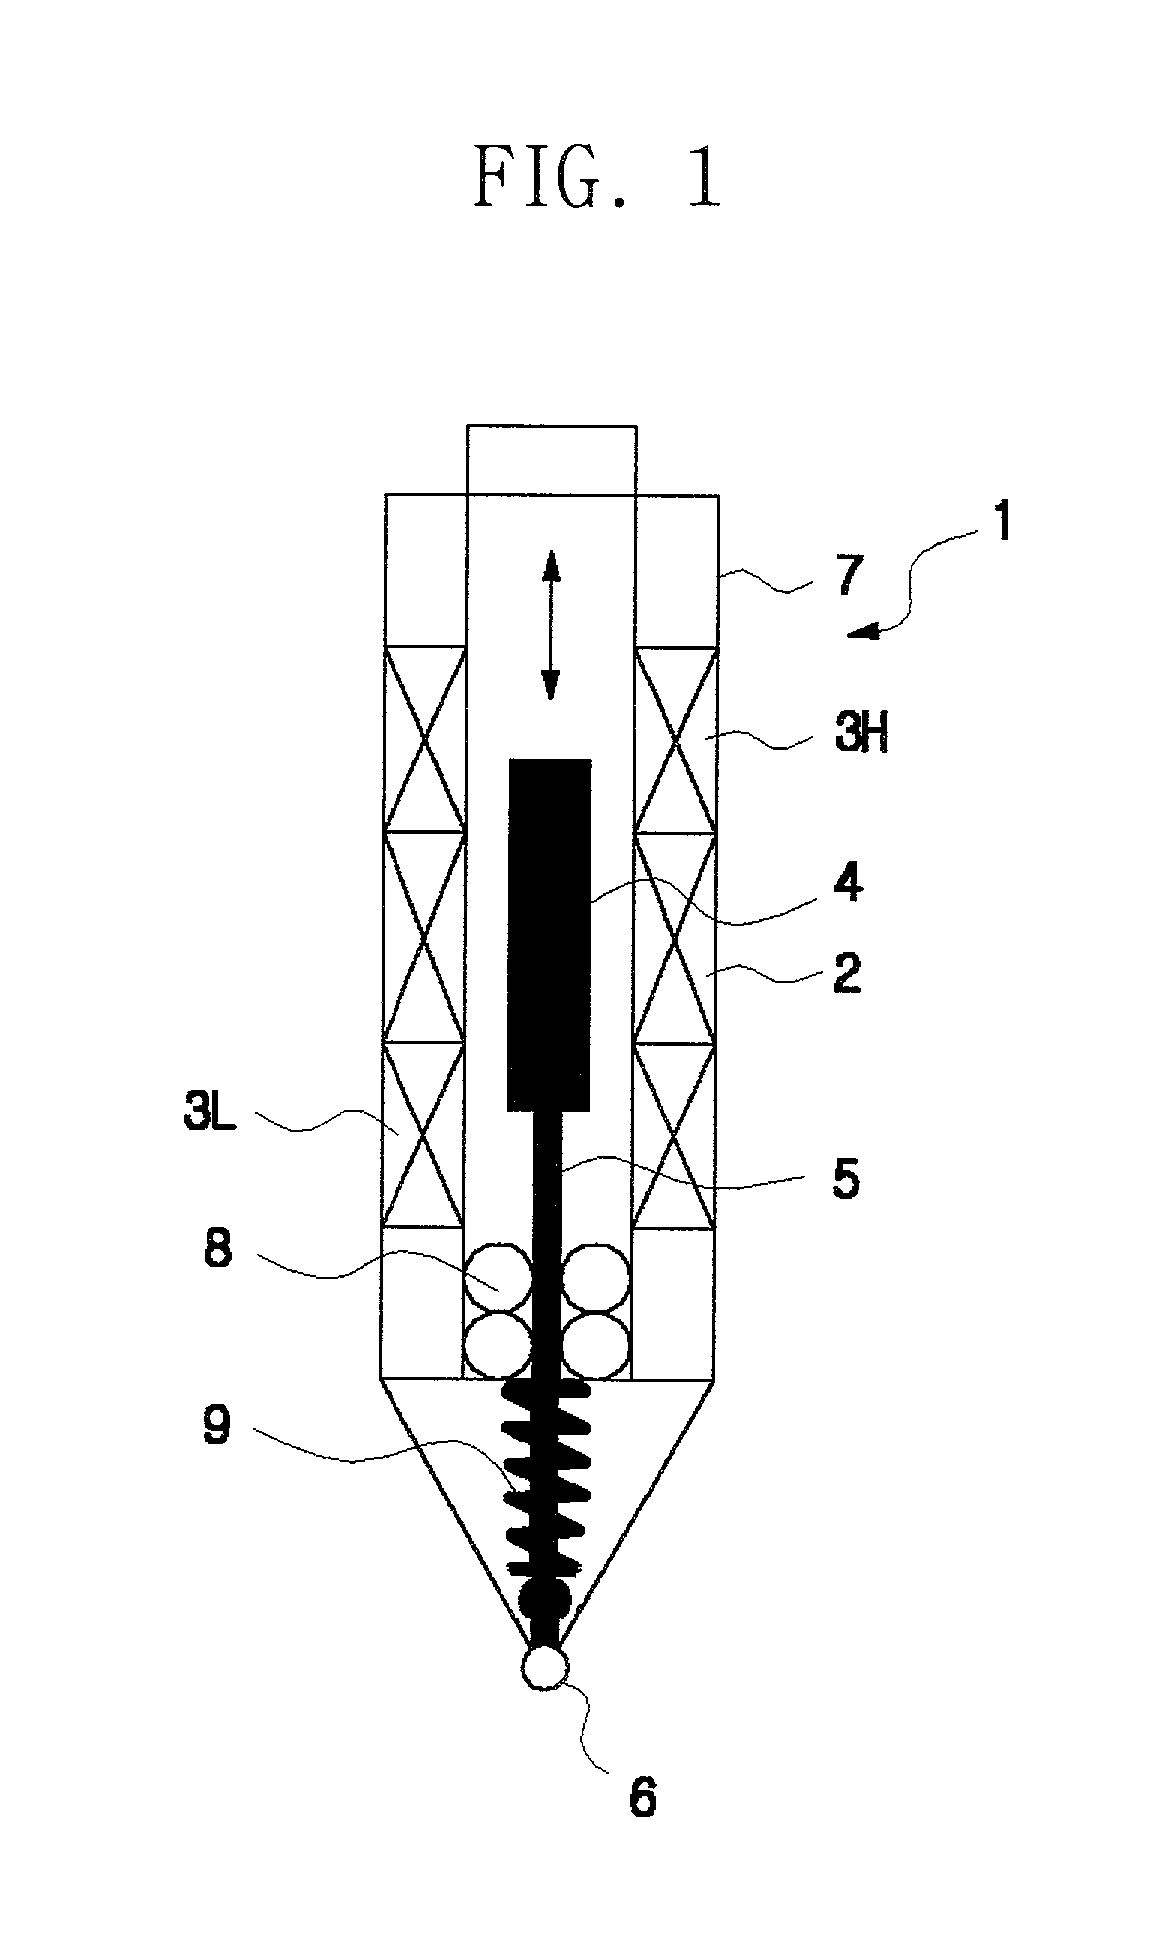 High sensitivity displacement measuring device using linear variable differential transformer